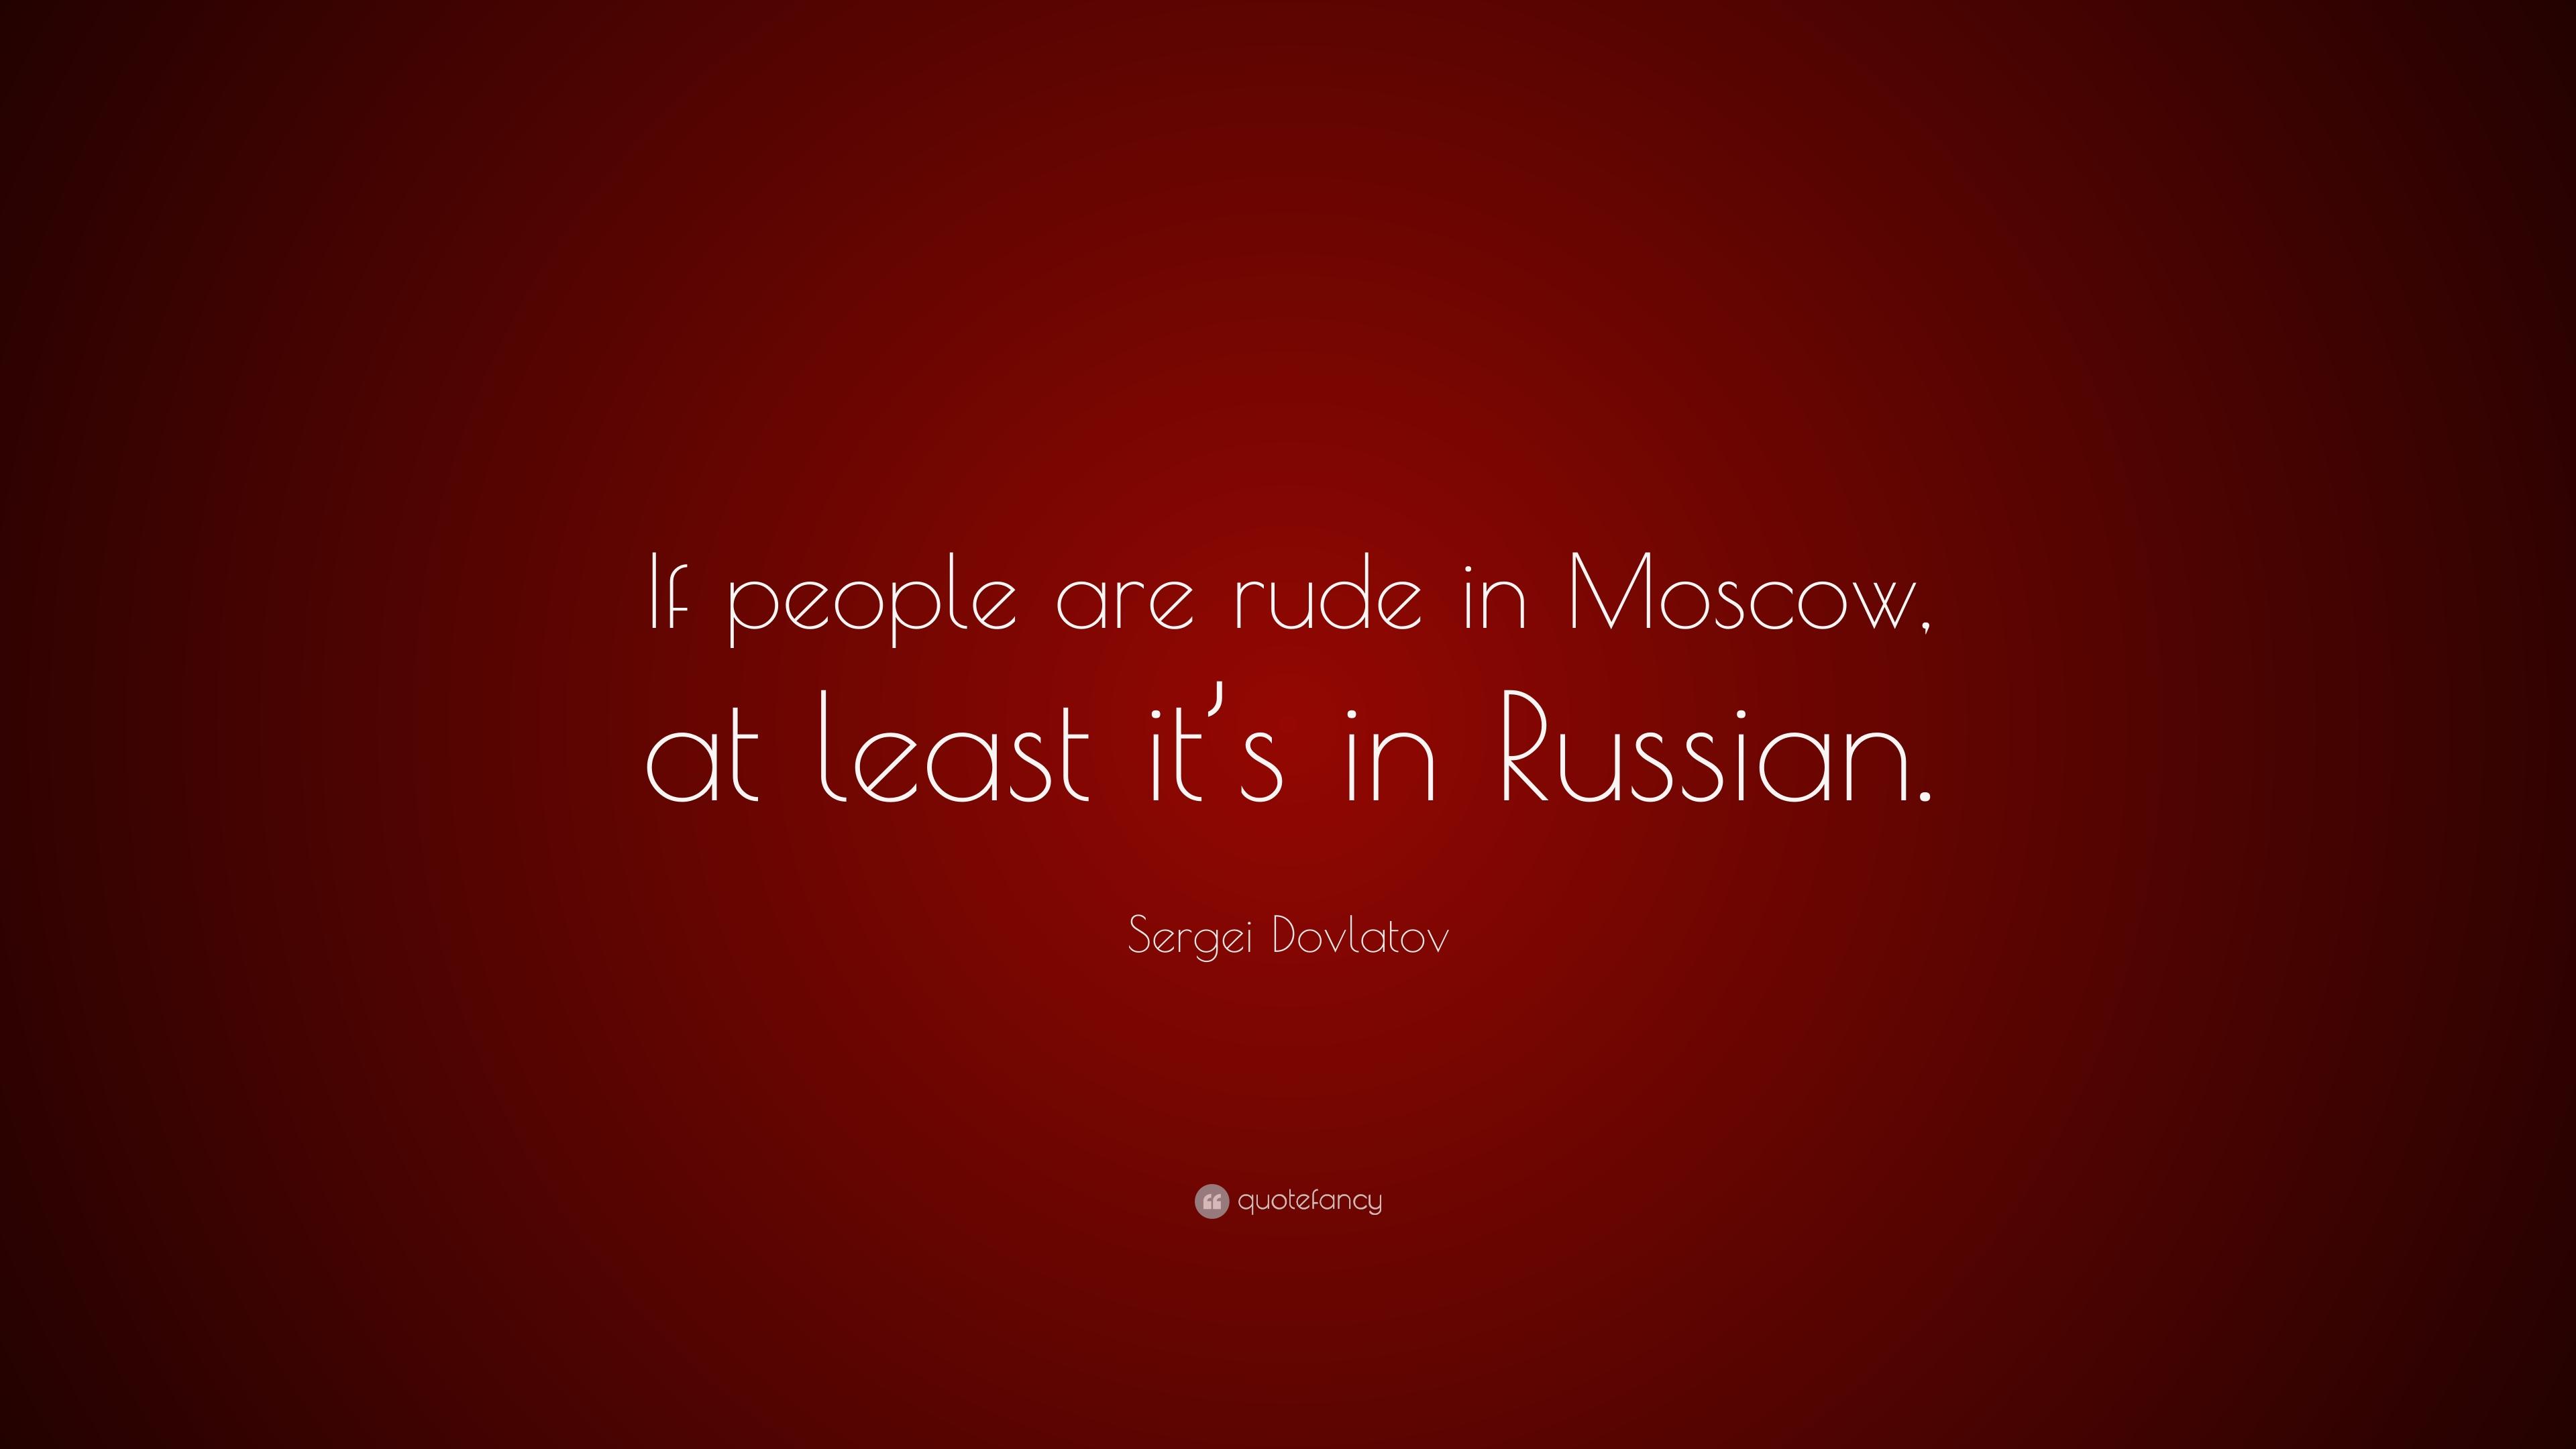 Sergei Dovlatov Quote: "If people are ...quotefancy.